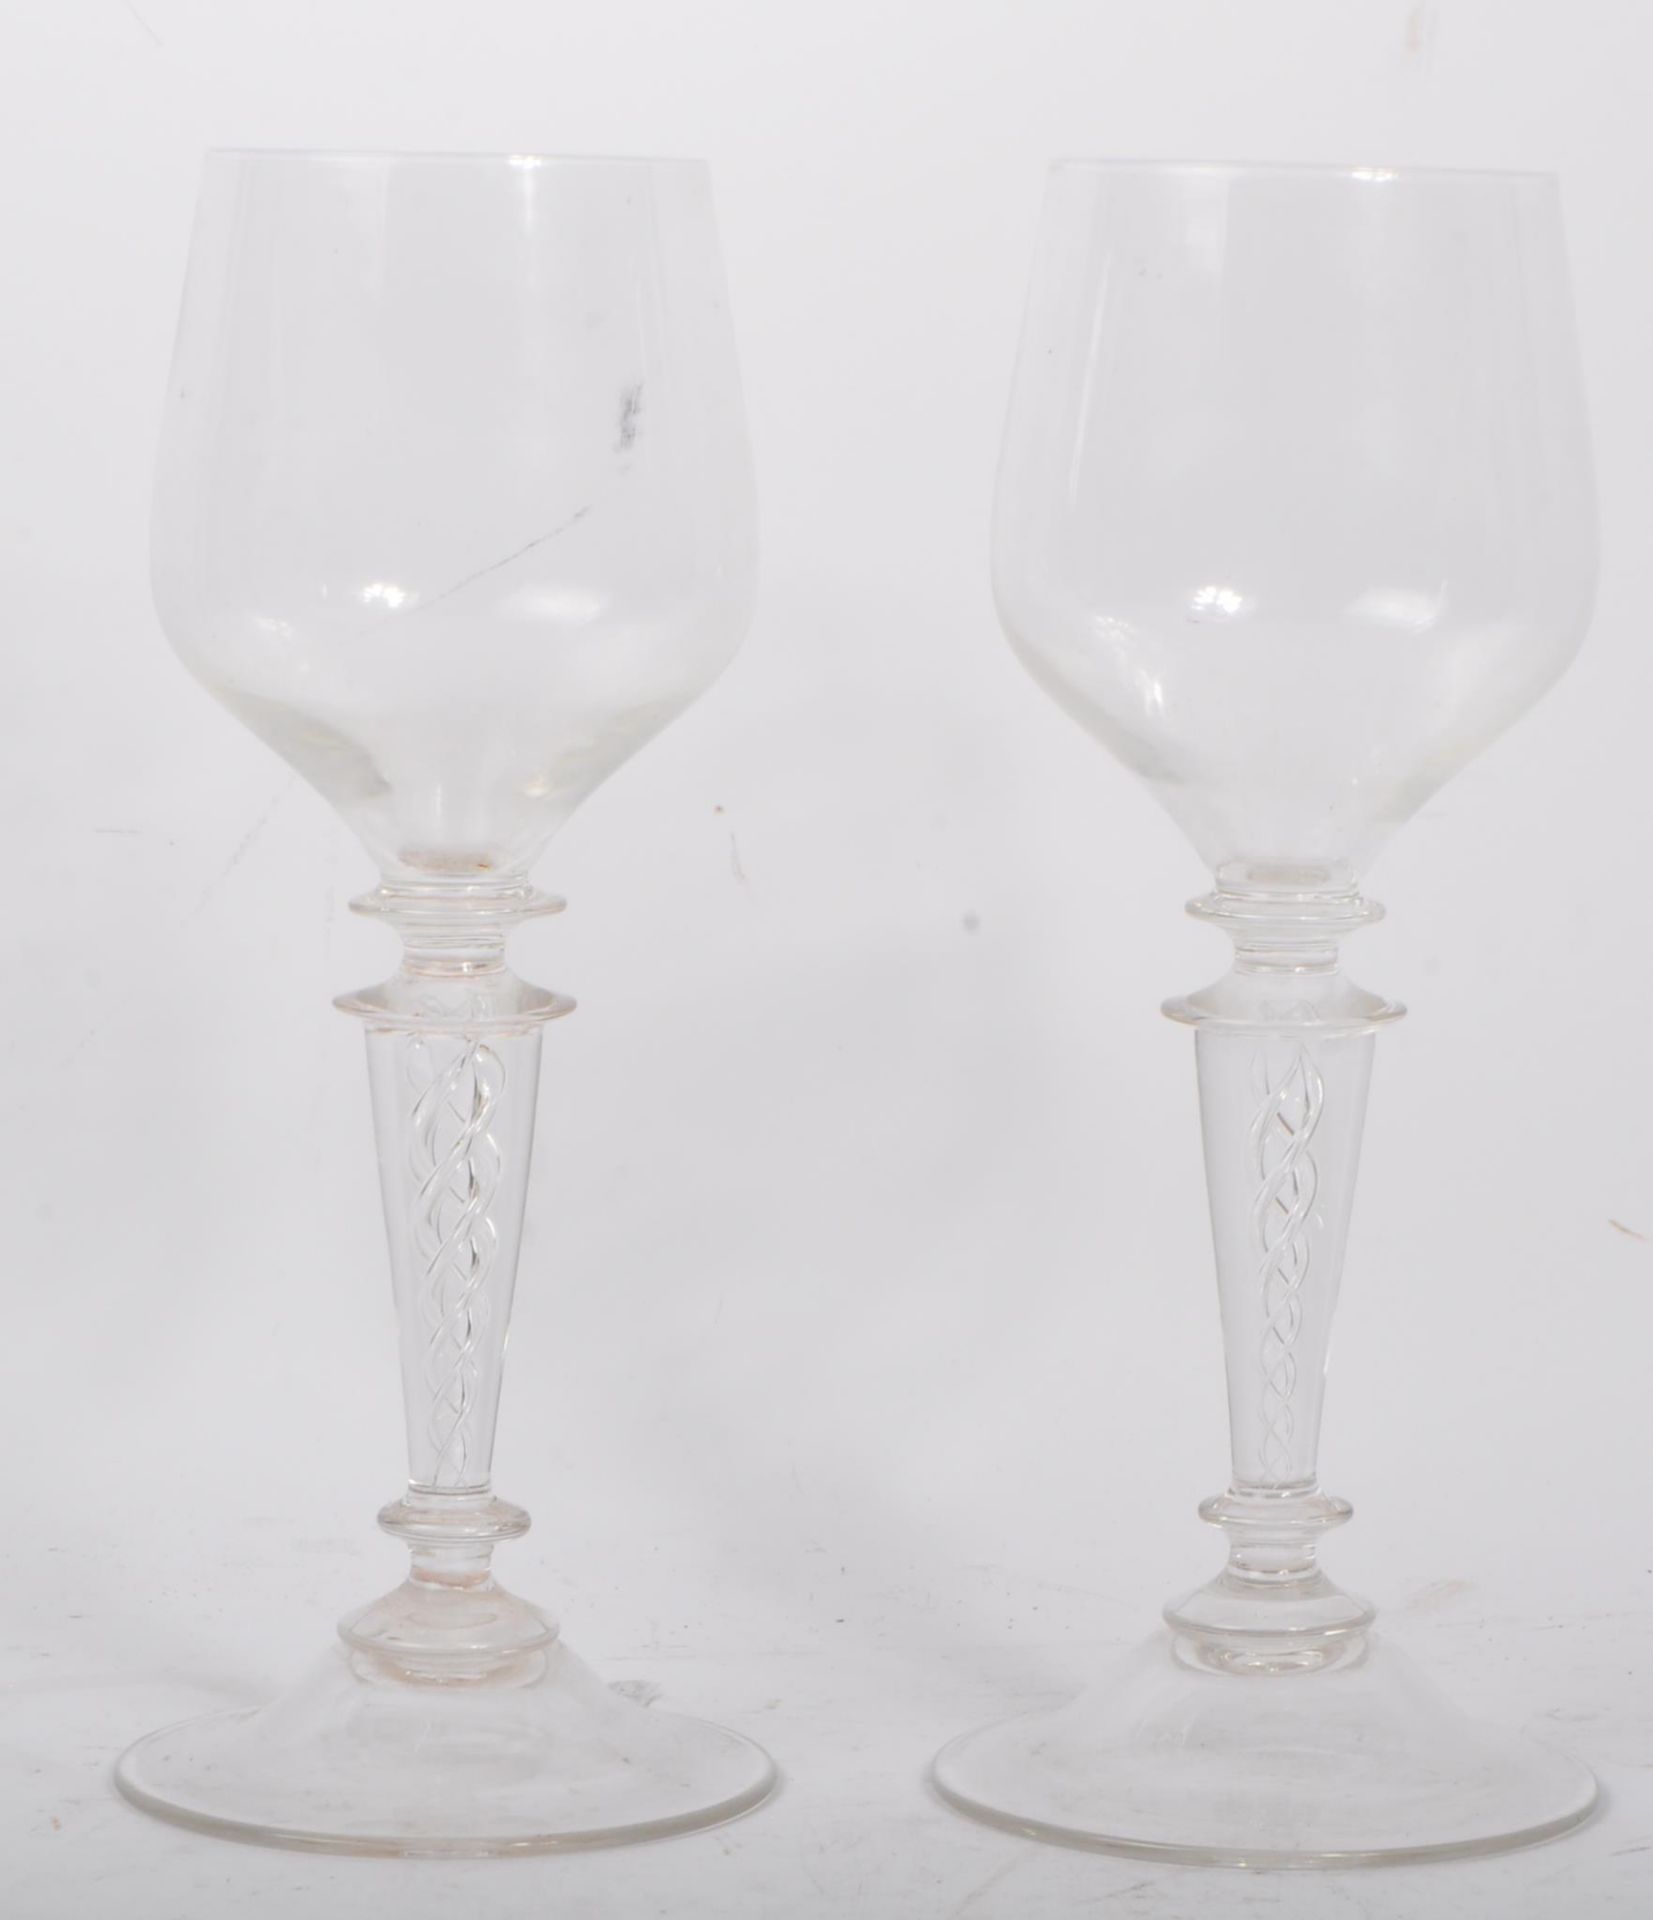 PAIR OF MID CENTURY 1950S CLEAR GLASS OVERSIZED WINE GLASSES